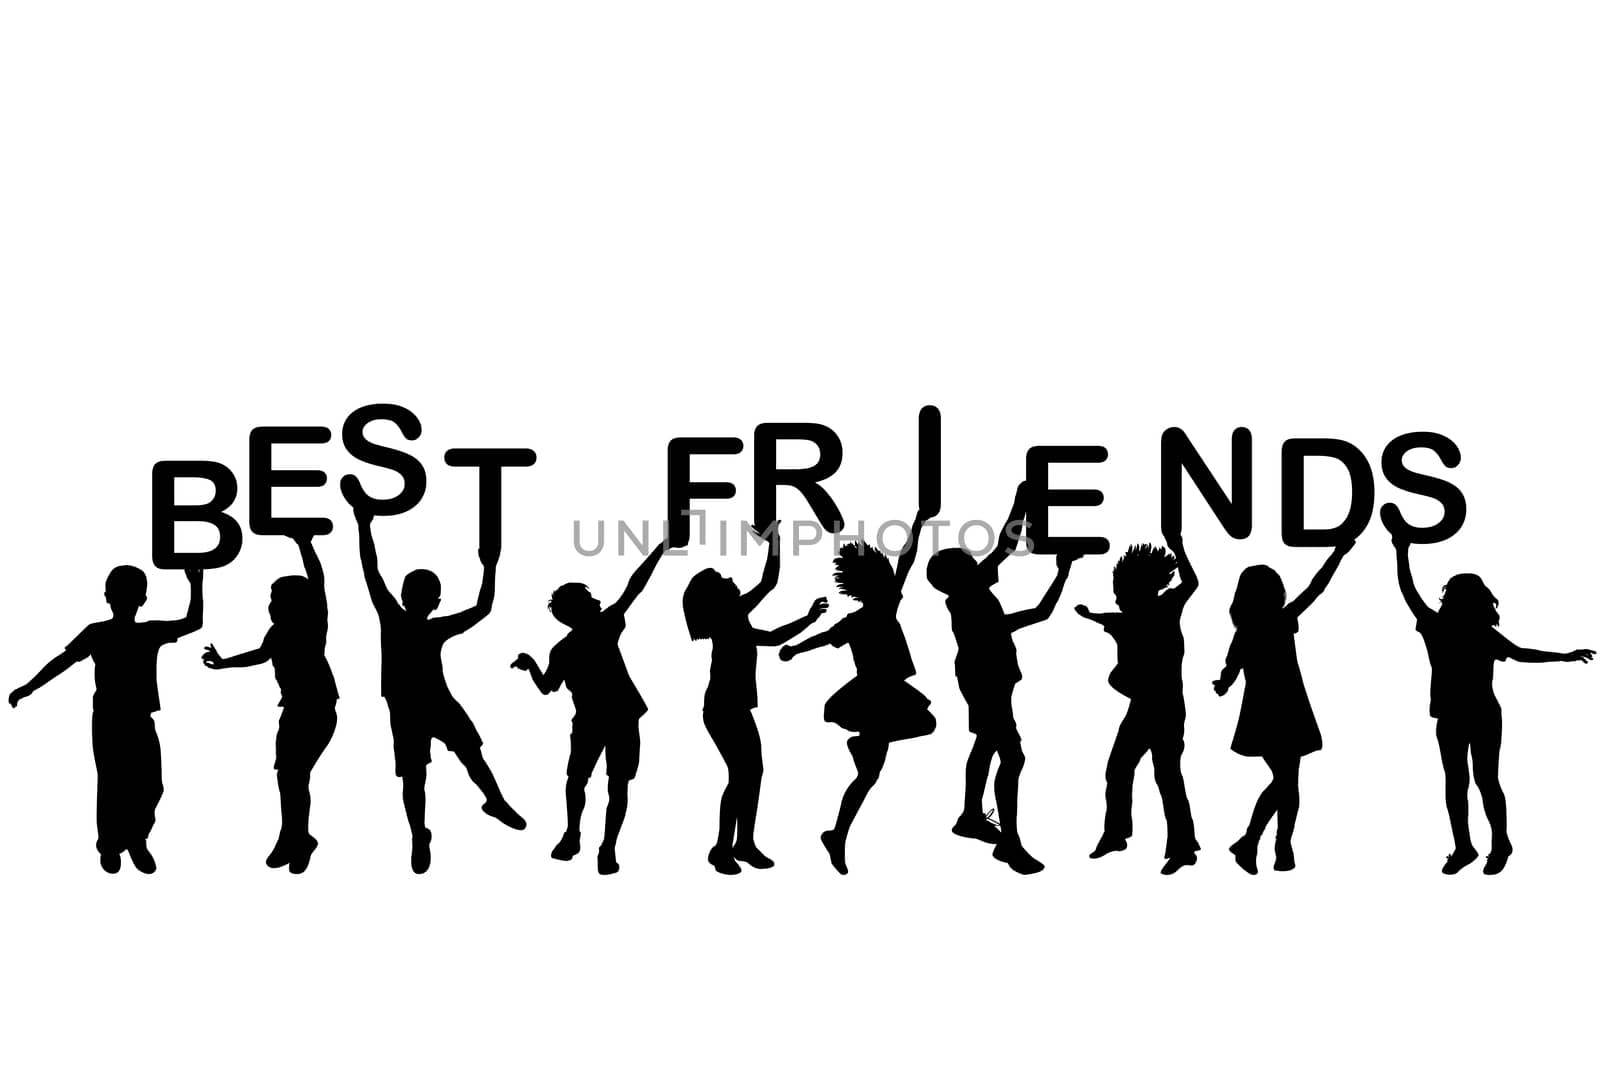 Children silhouettes holding letters building the words BEST FRIENDS